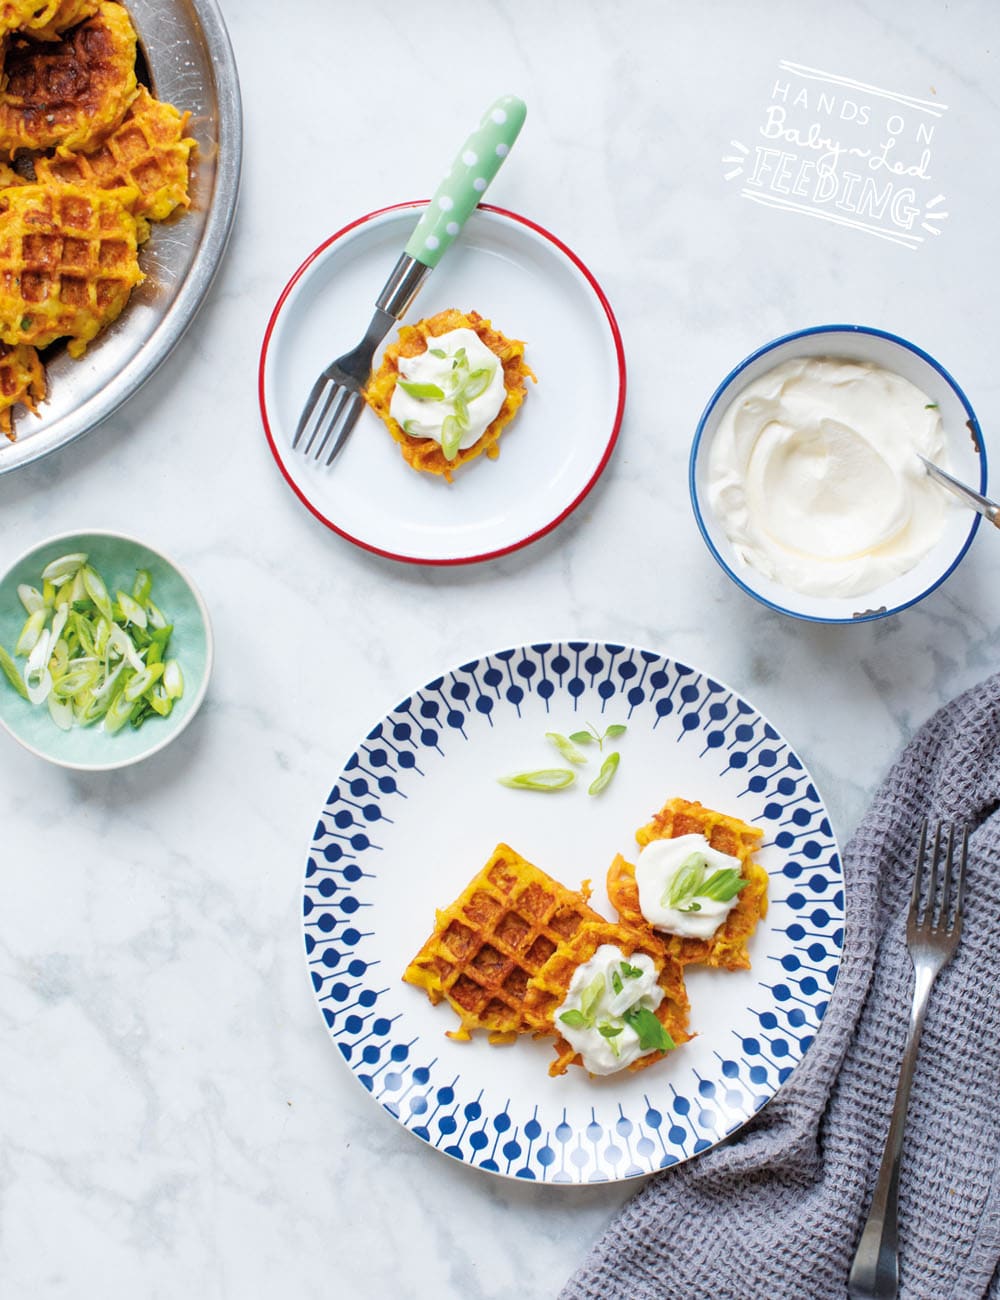 Baby Led Weaning Carrot and Cheese Waffles Recipe Images4